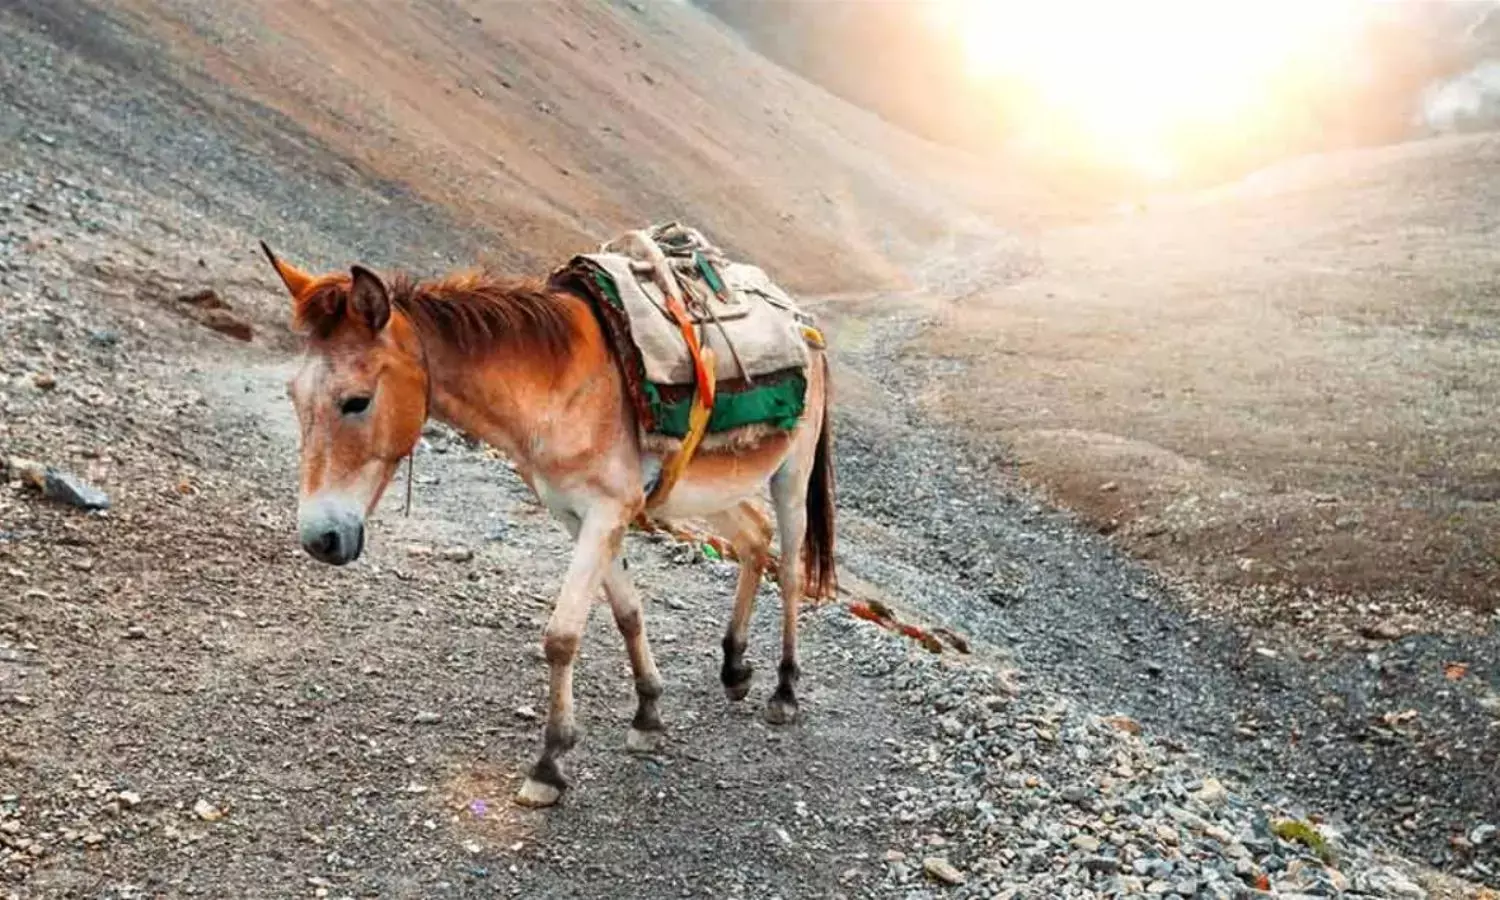 Donkeys Suffer So Much, Need Better Care